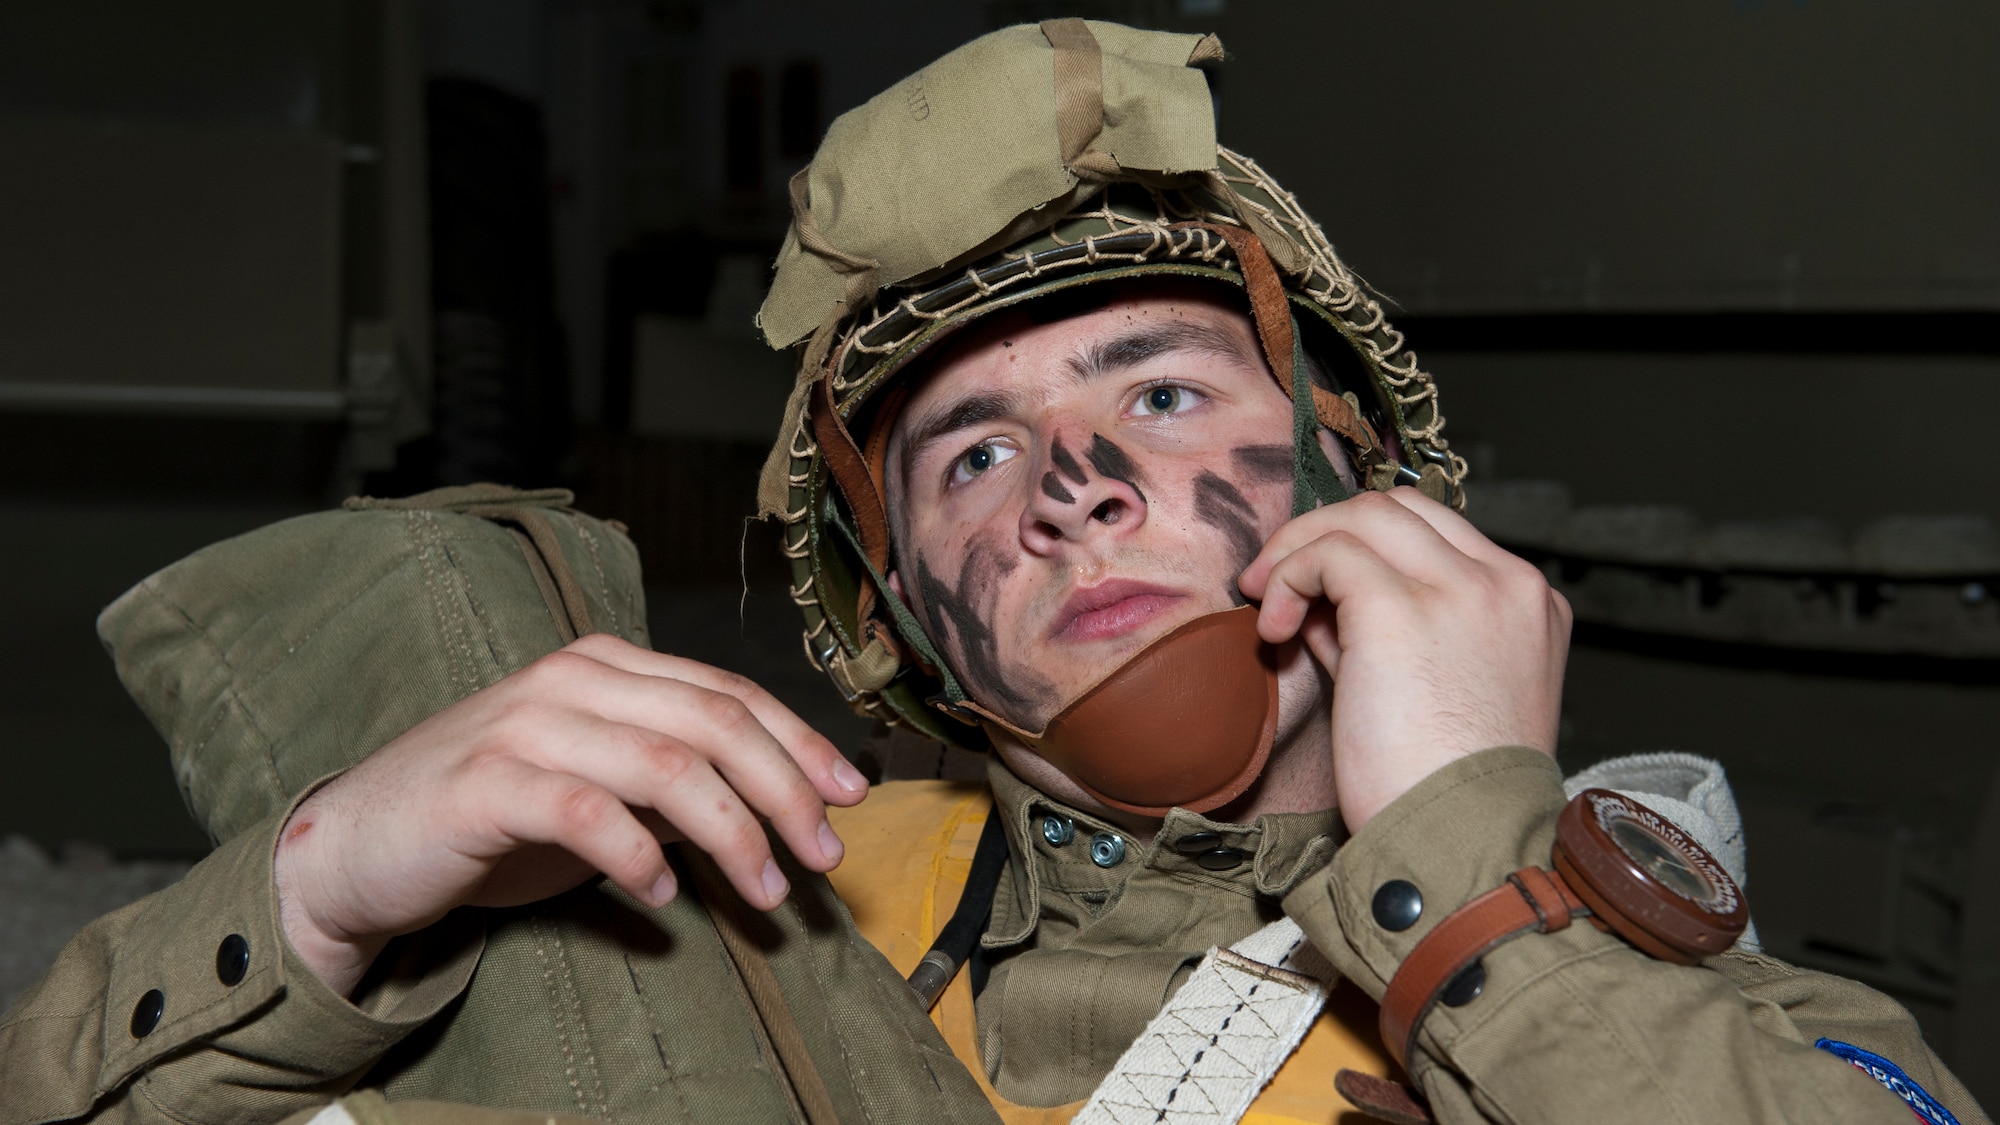 Christian Holland adjusts the chin strap of his combat helmet April 18, 2015, at the Air Mobility Command Museum on Dover Air Force Base, Del. Holland, 16, travelled from Hummelstown, Pa. to take part in the event. (U.S. Air Force photo/Airman 1st Class Zachary Cacicia)